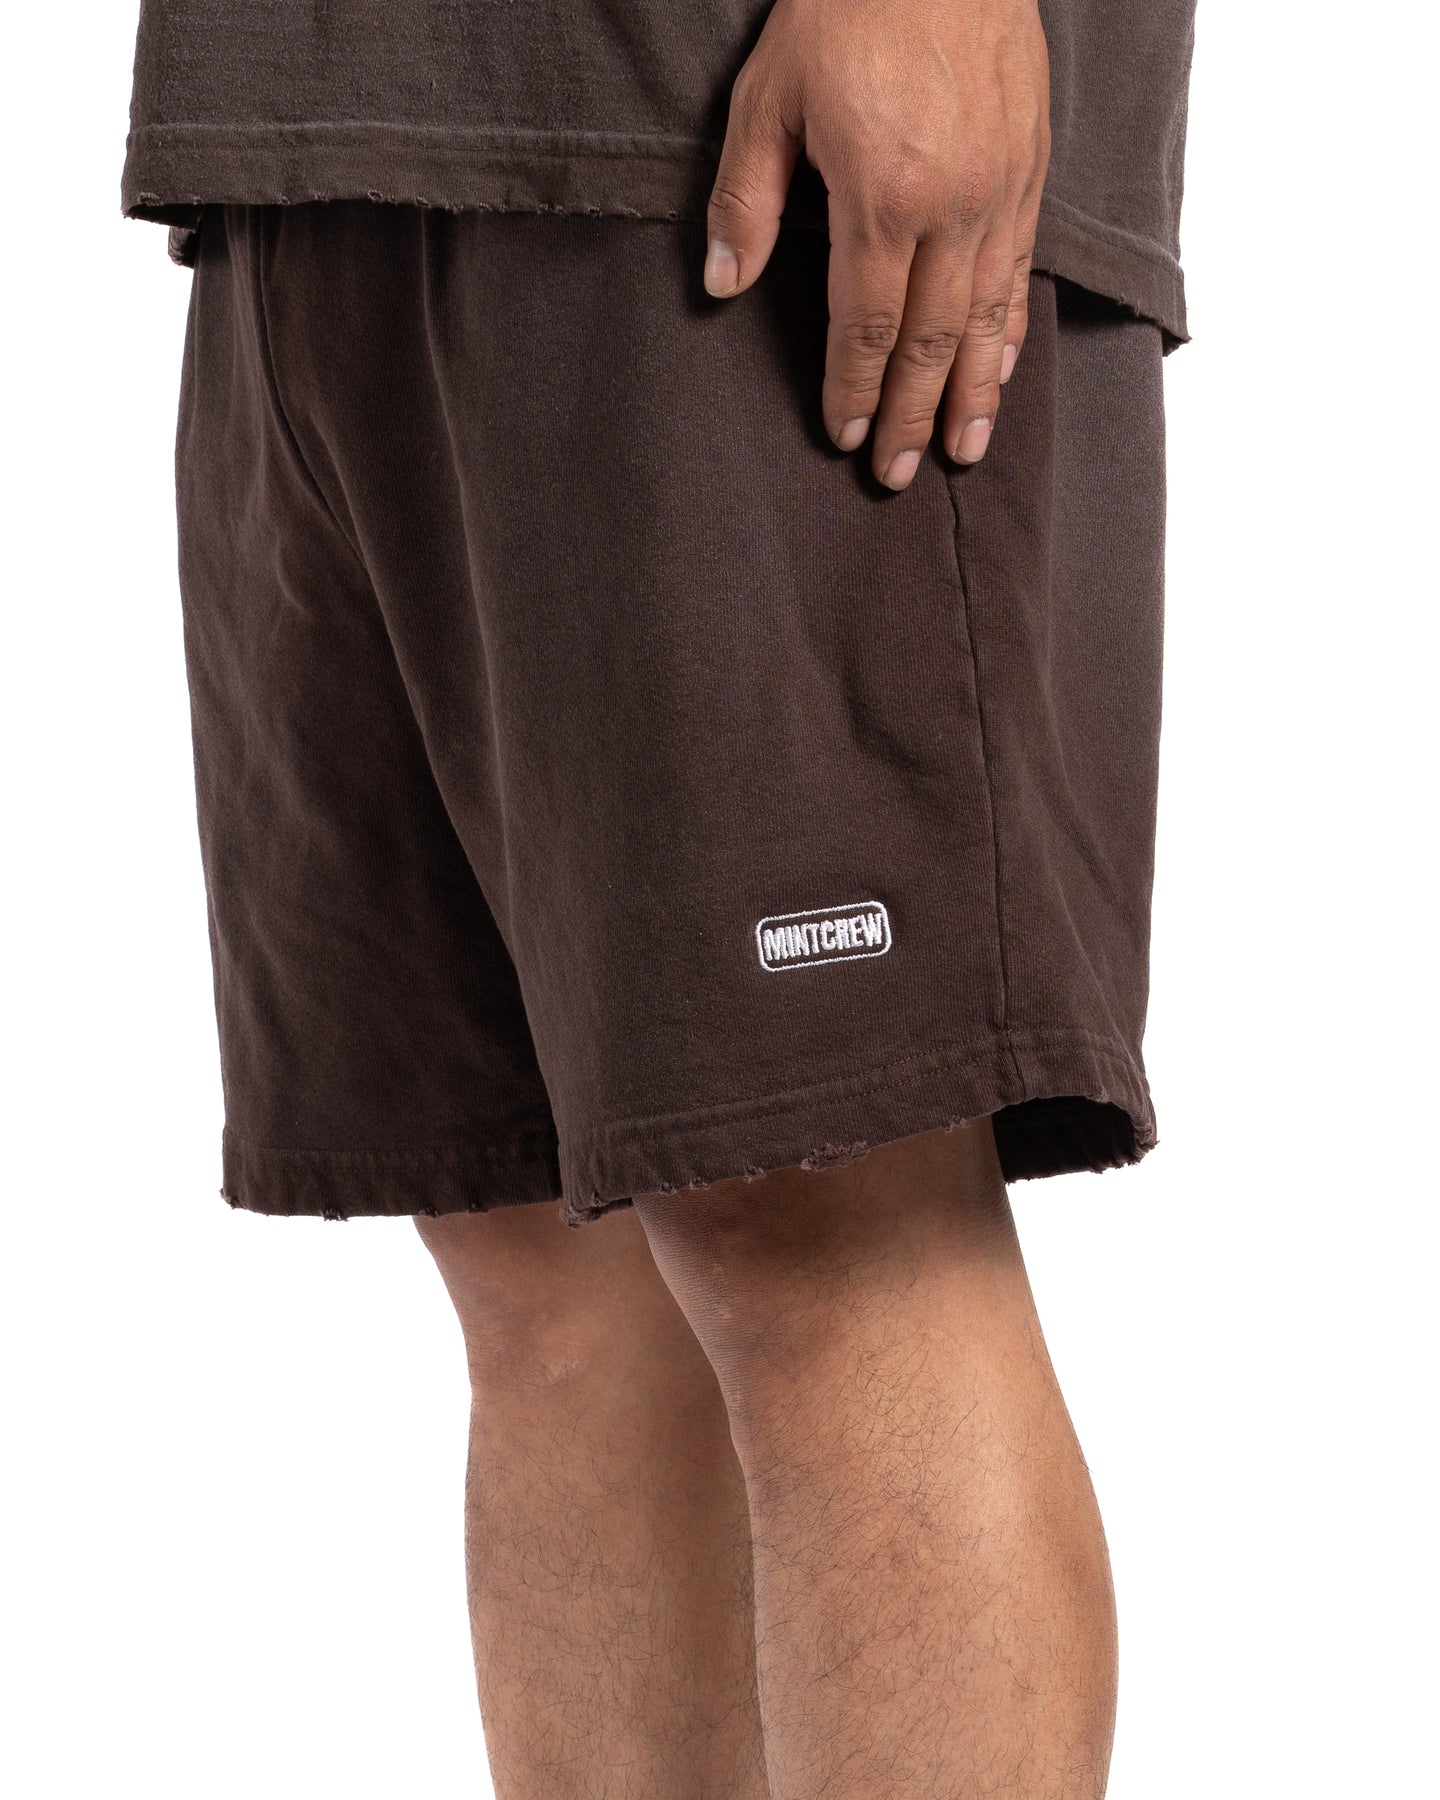 SUN FADED STAMPED LOGO SHORTS (BROWN)